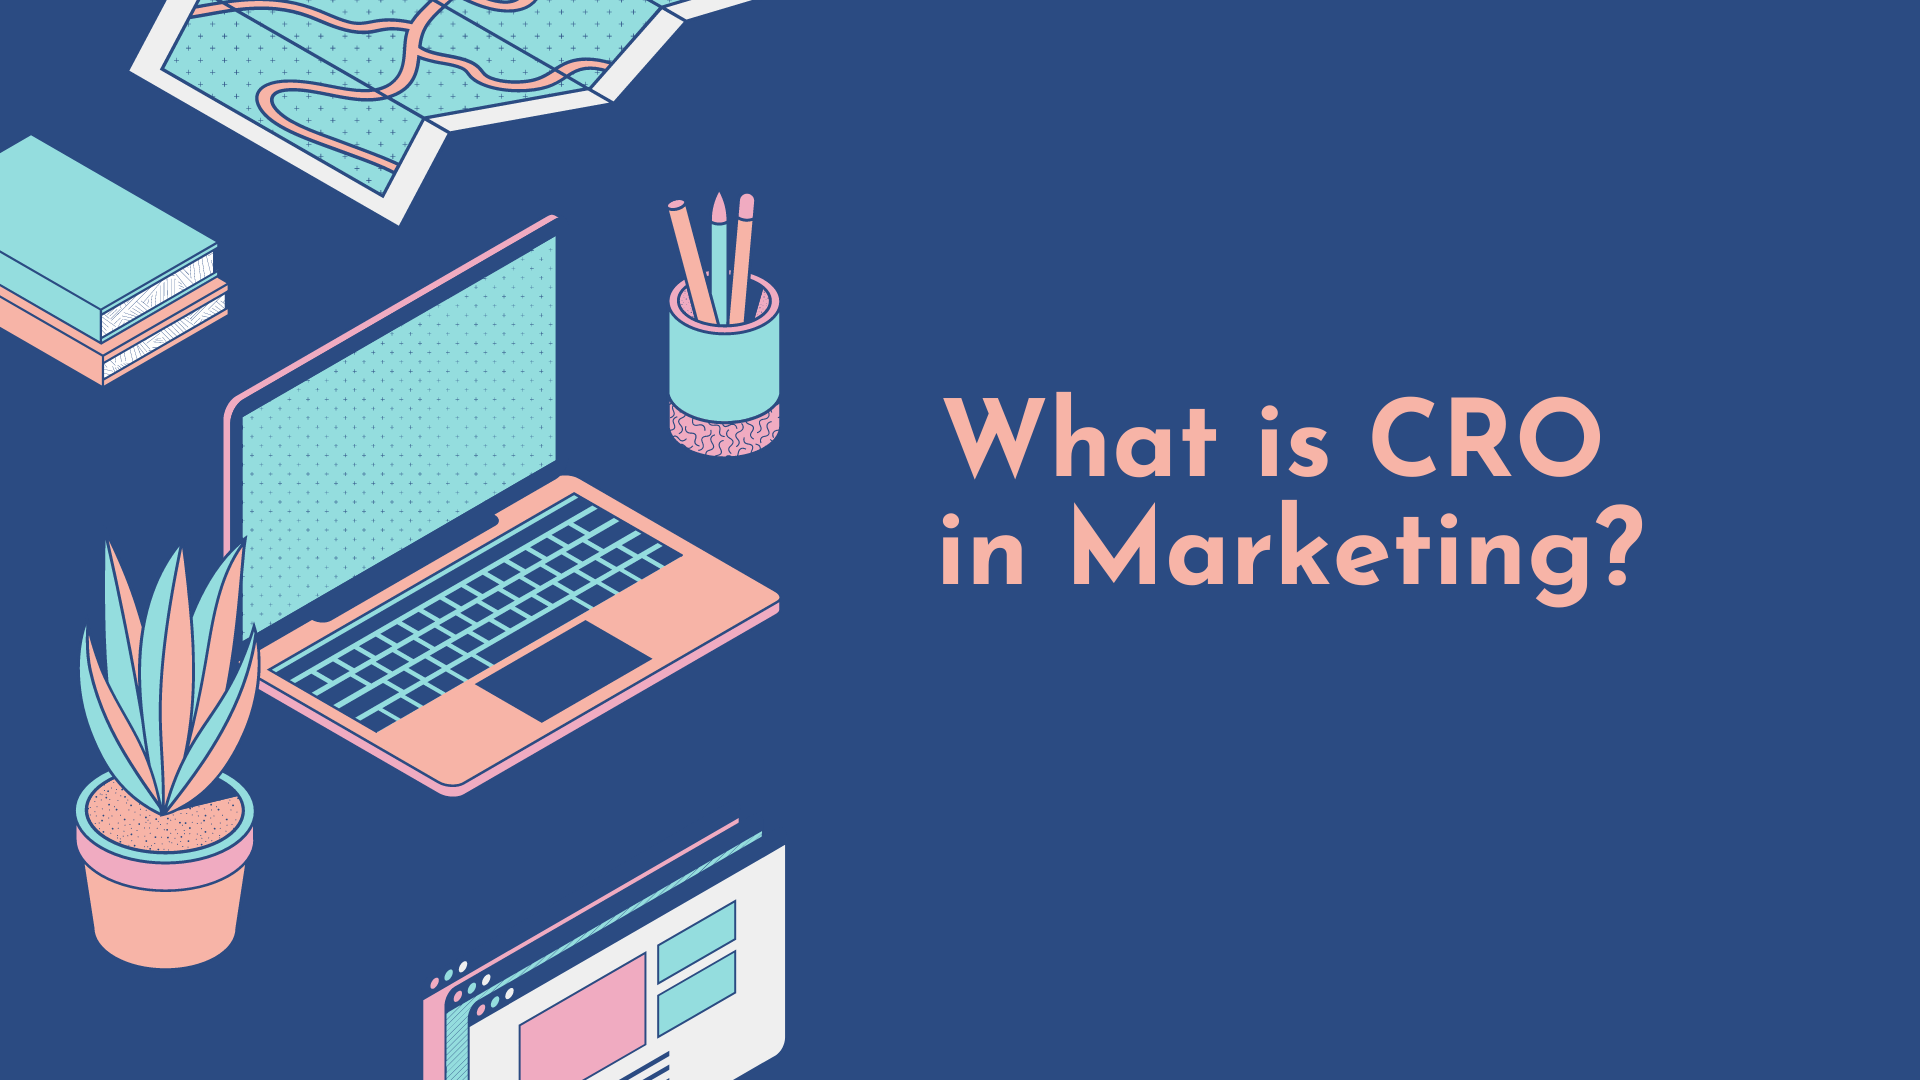 What is cro